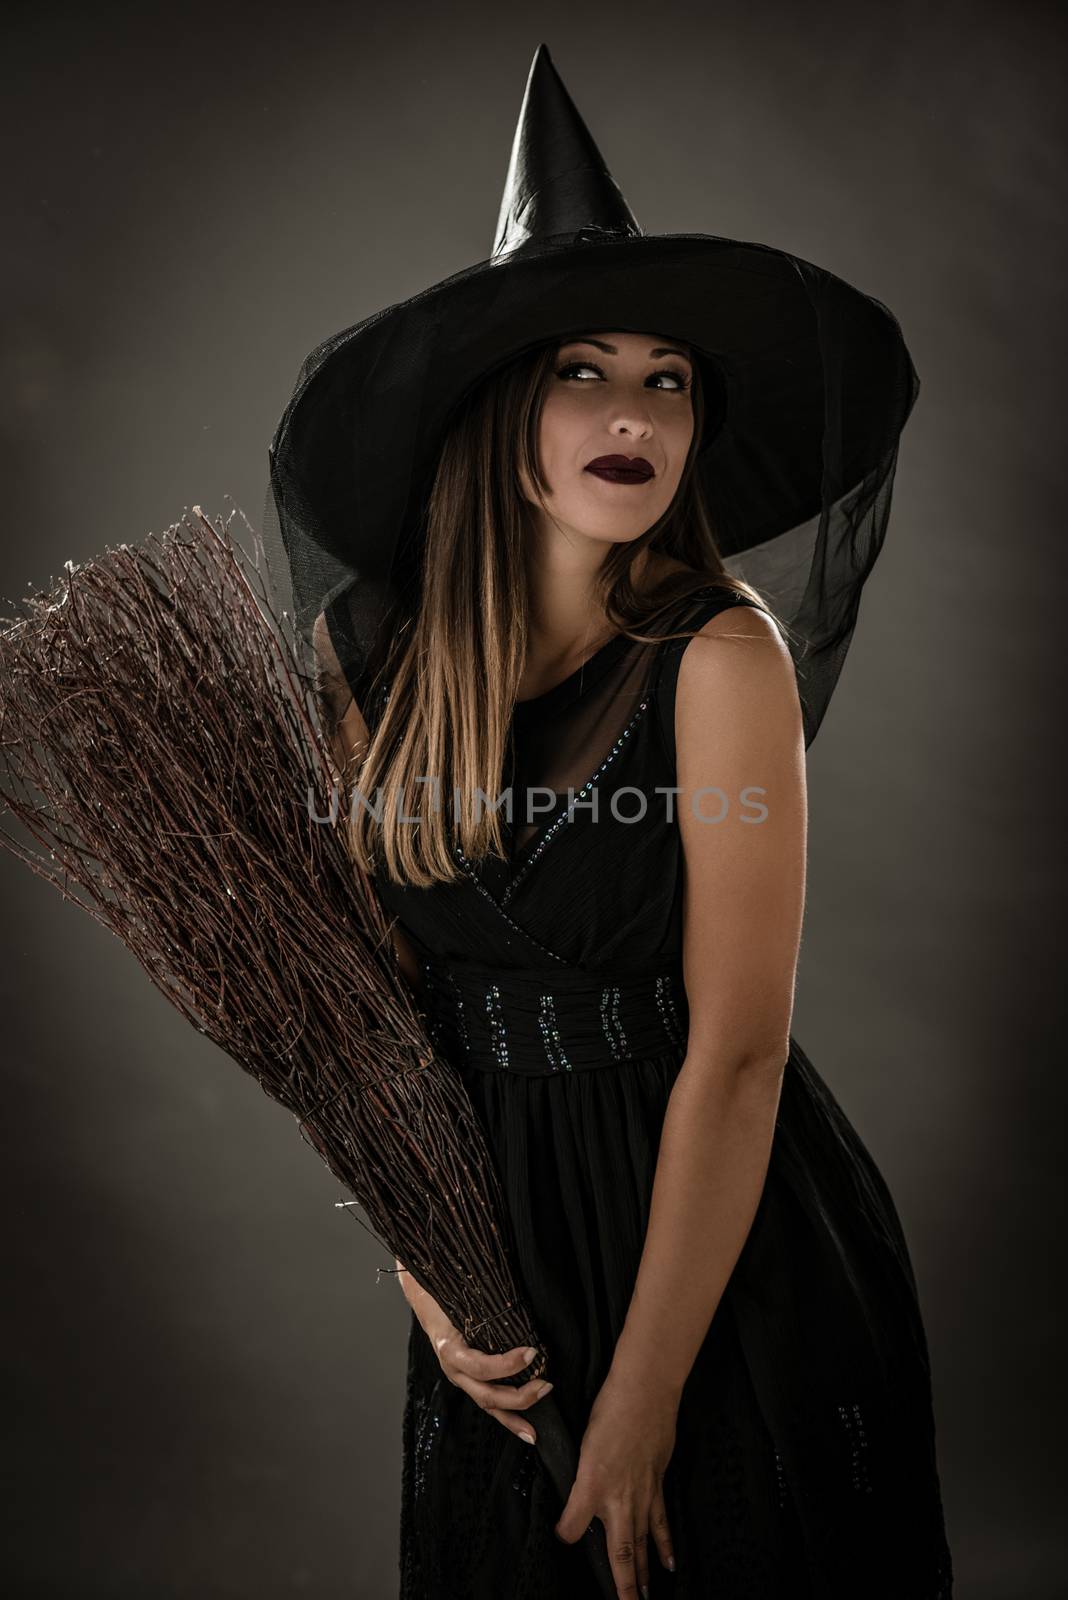 Young woman dressed like a witch. She is in dark clothing and holding a broom. 